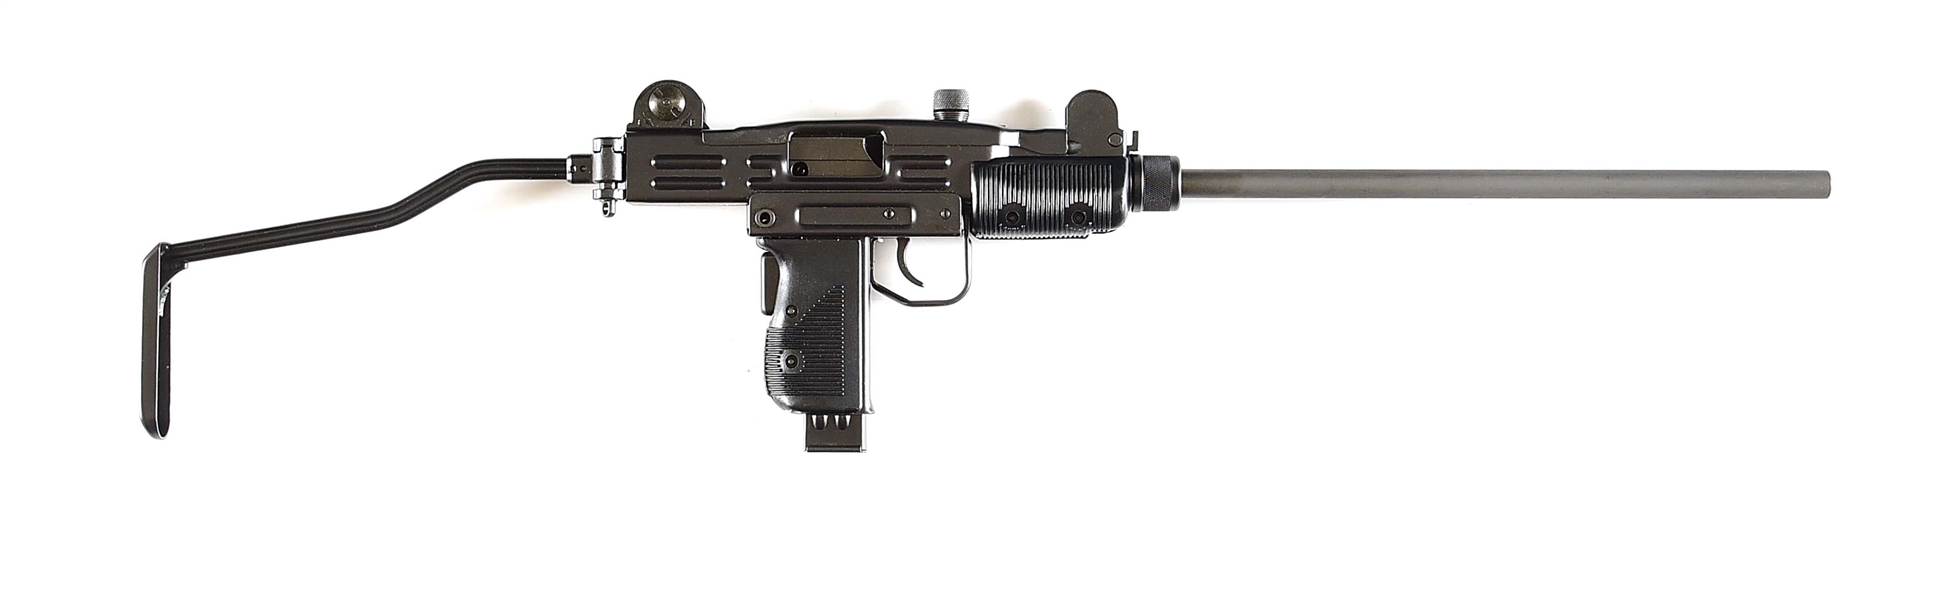 (M) VERY FINE ISRAELI MILITARY INDUSTRIES / ACTION ARMS UZI MINI CARBINE 9MM PARA SEMI-AUTOMATIC RIFLE WITH CASE & ACCESSORIES.